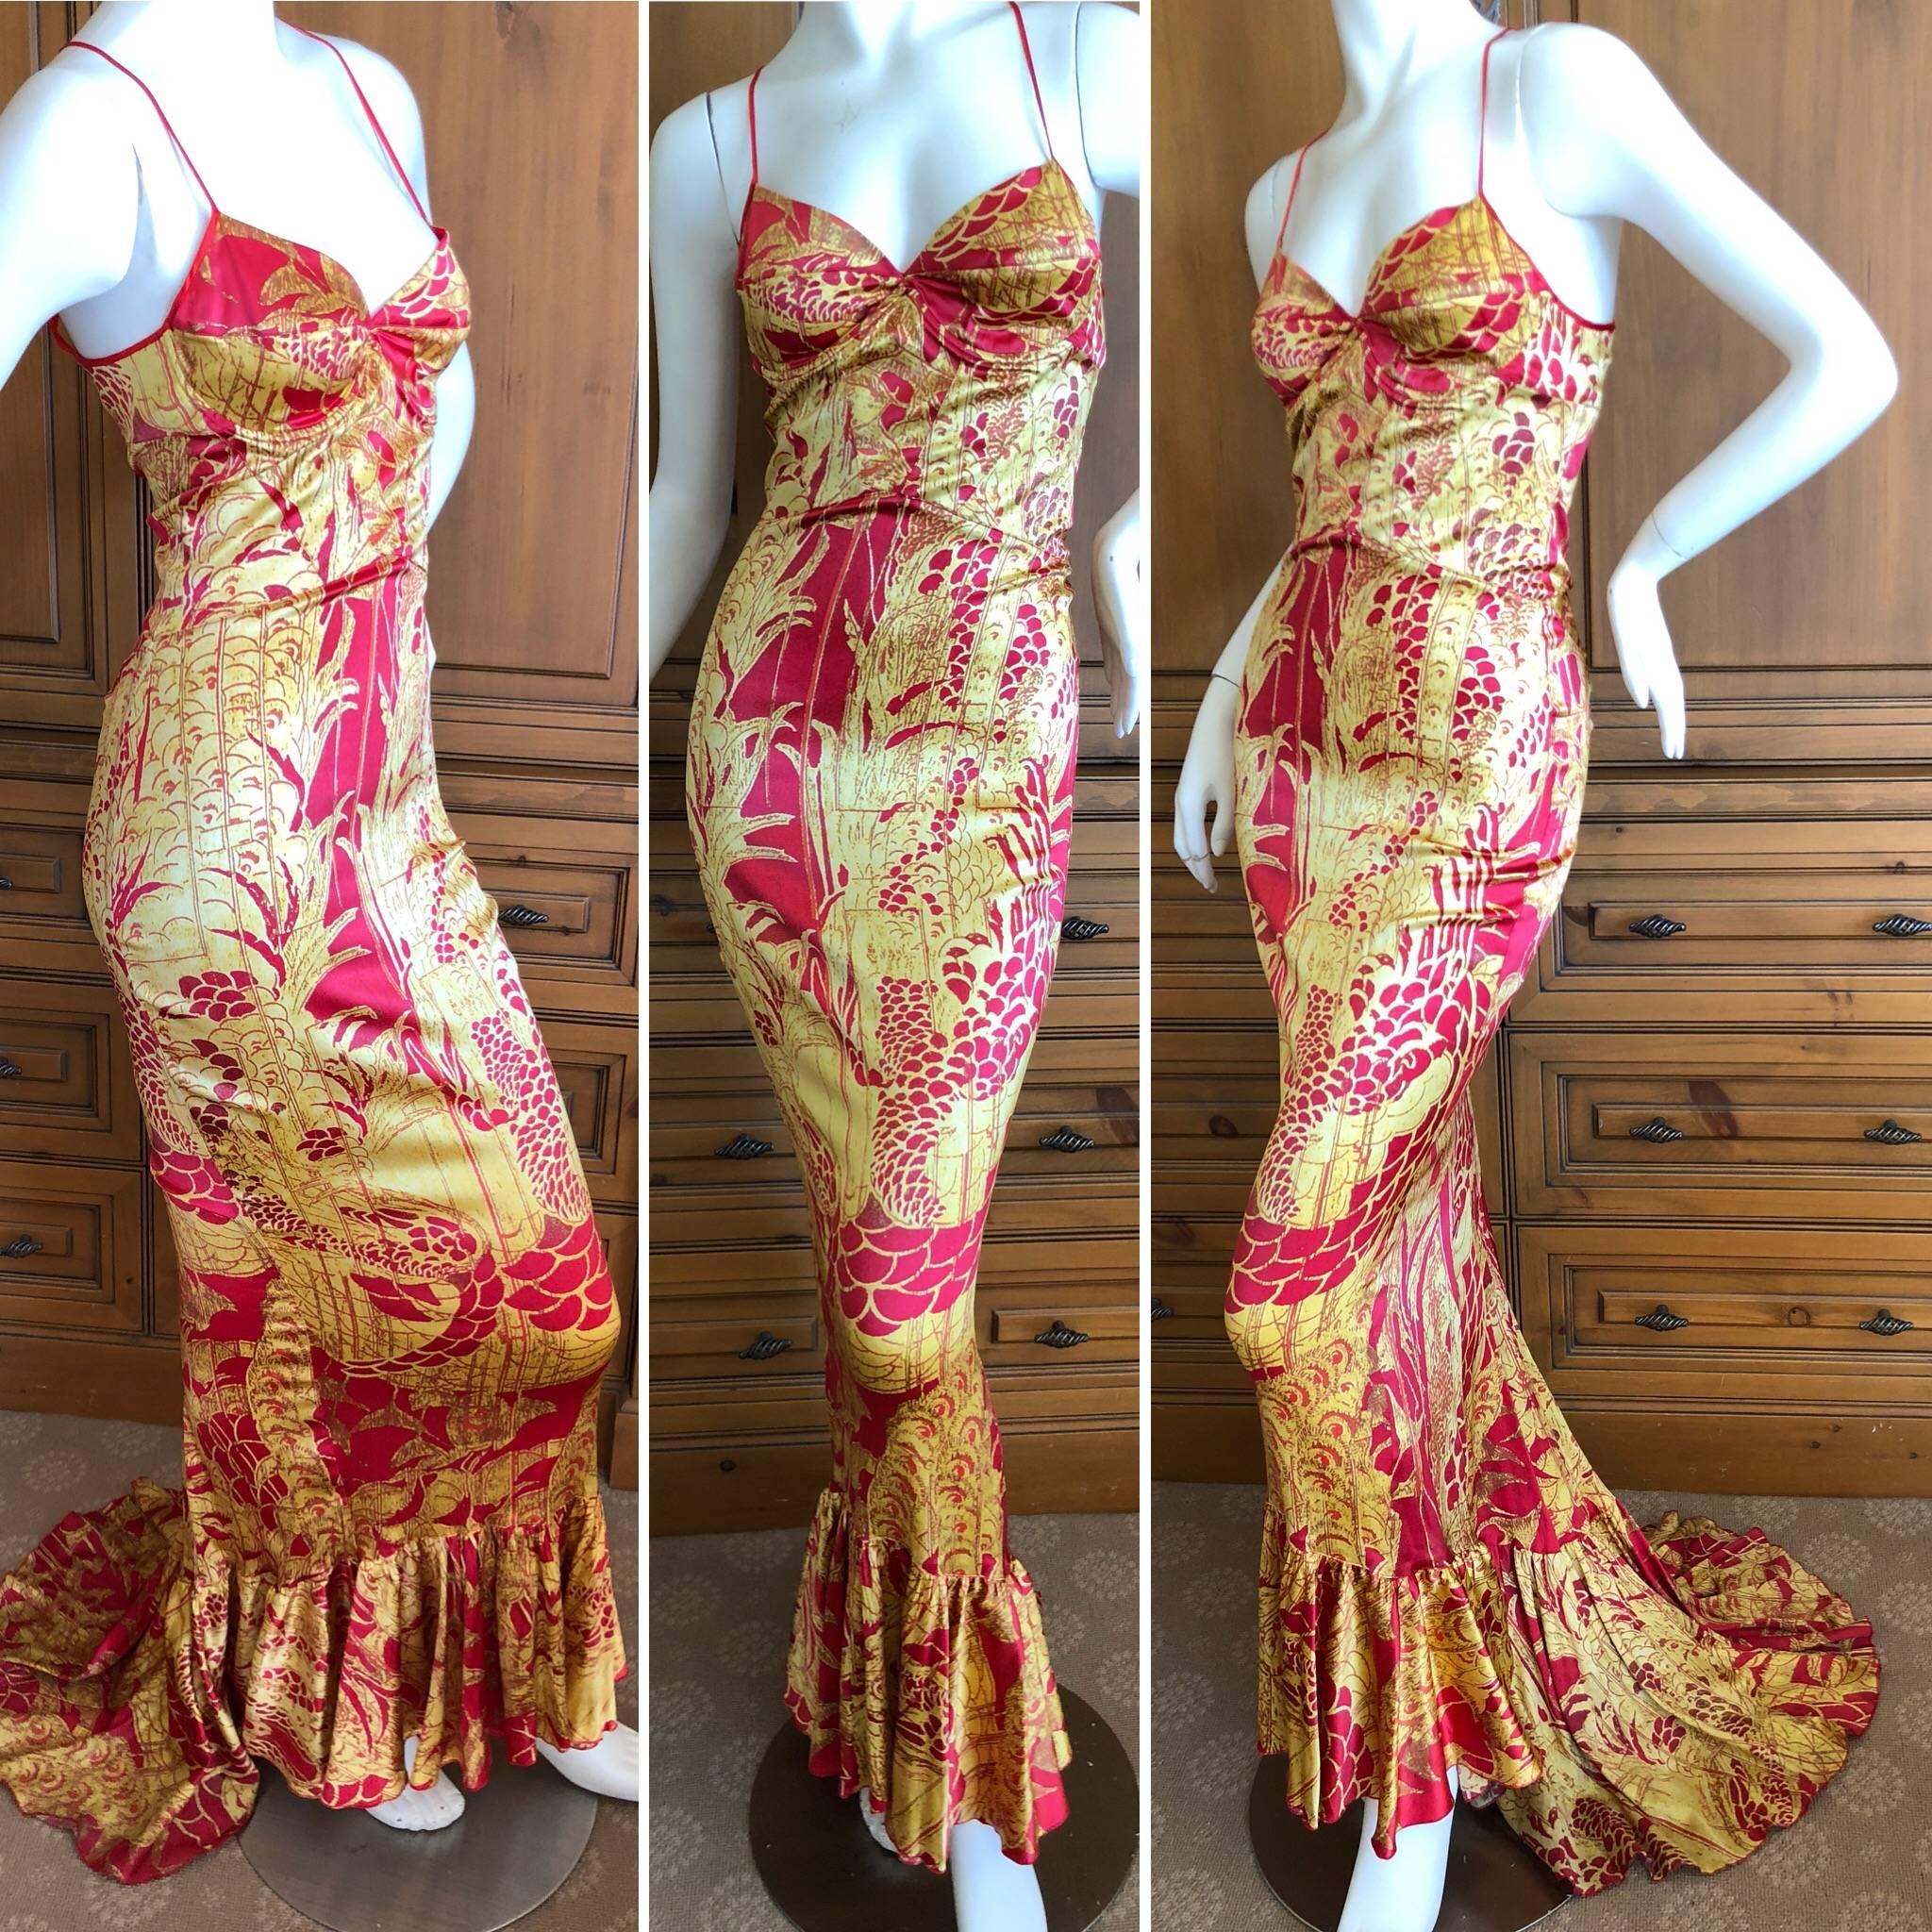 Roberto Cavalli Elegant Fishtail Mermaid Back Evening Dress.
The print is a stylized blow up of Aubrey Beardsley's famous Salome Peacock
 This is so pretty, with a rich gold print, and mermaid fishtail back.
 Size 40, but runs small. Bust 36